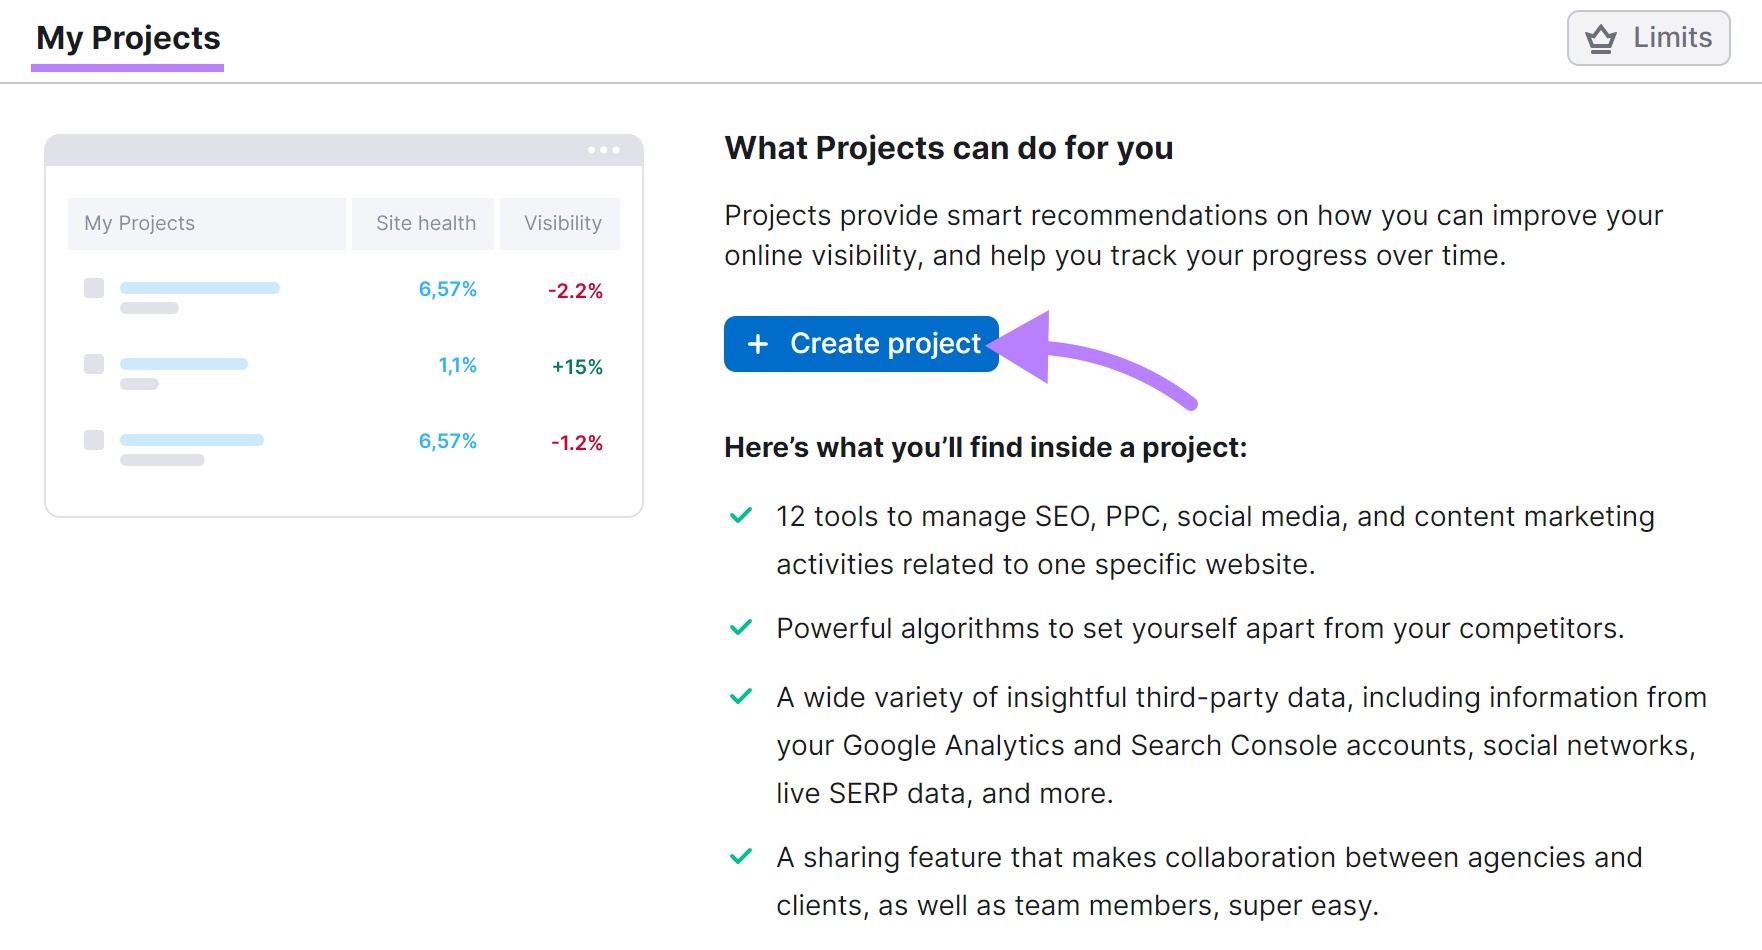 My projects page with the "Create project" button highlighted